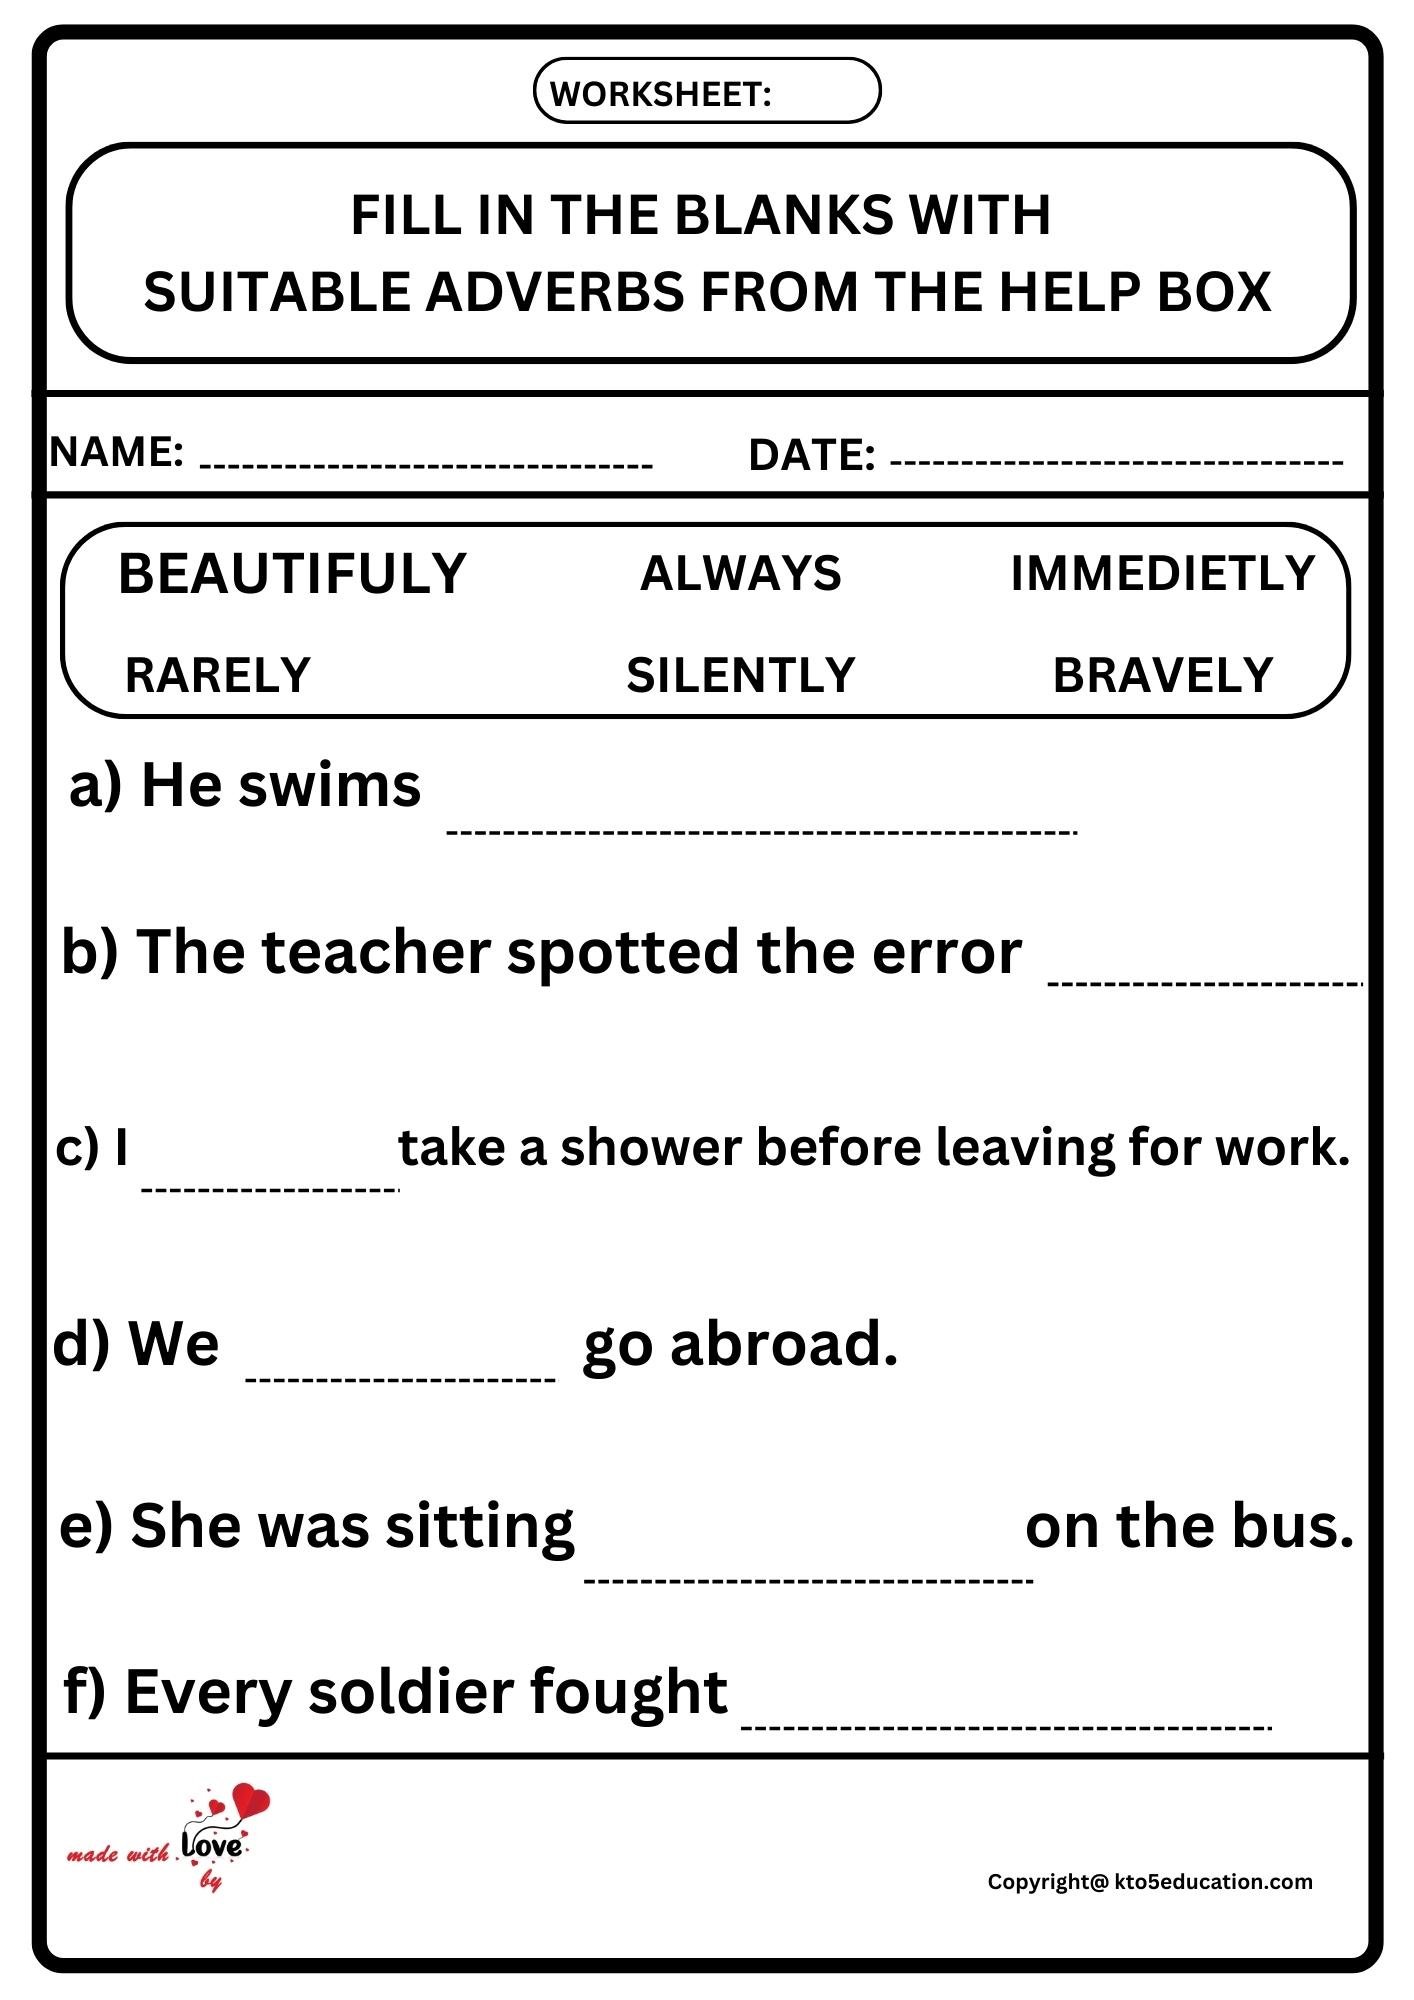 Fill in The Blanks With Suitable Adverbs From The Help Box Worksheet 2